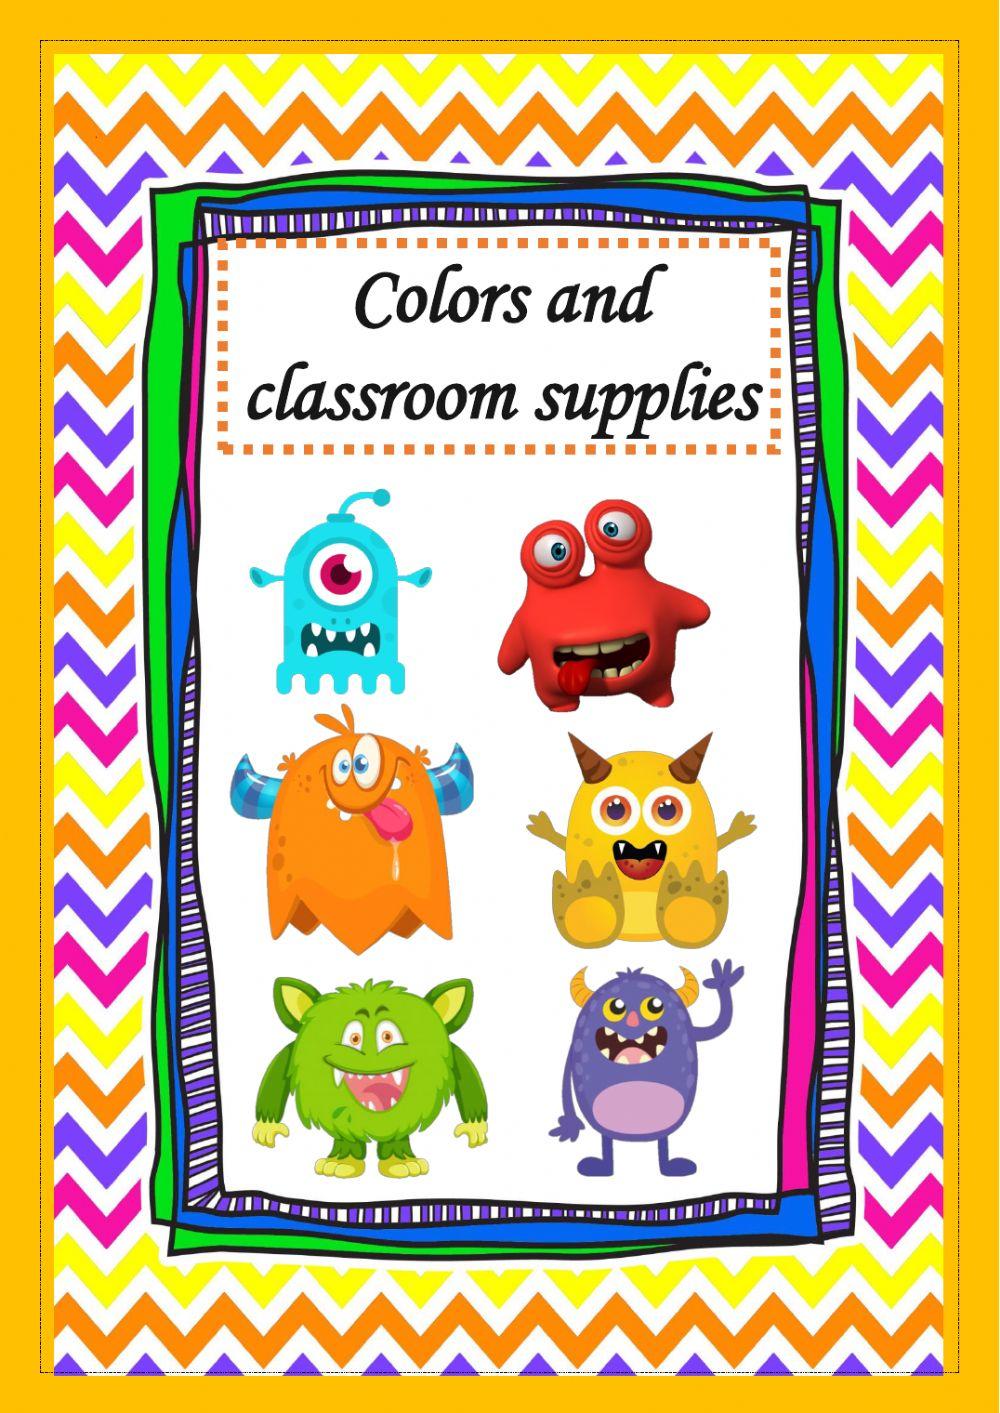 Color and Classroom supplies